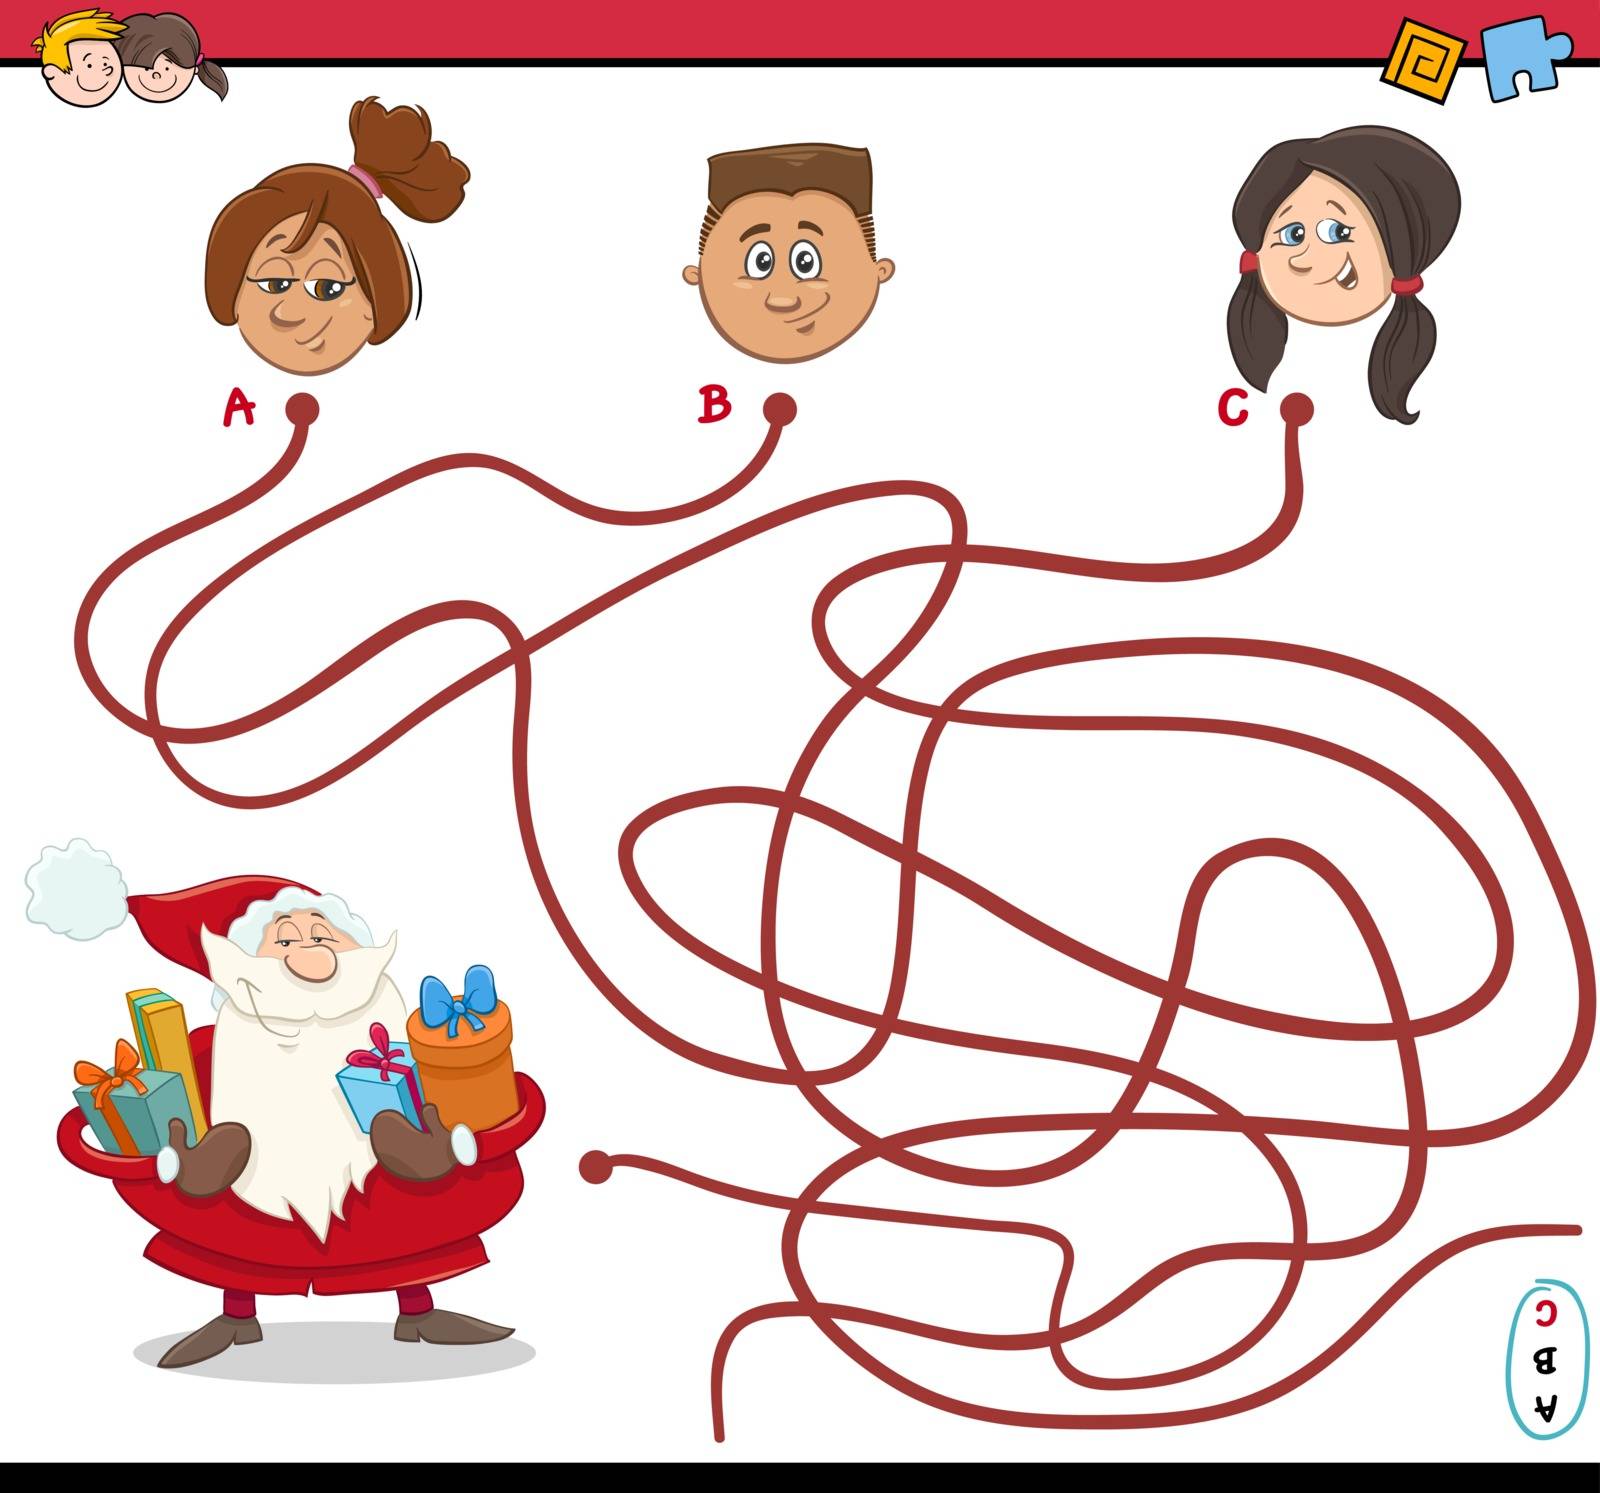 Cartoon Illustration of Paths or Maze Puzzle Activity with Santa Claus Character and Children